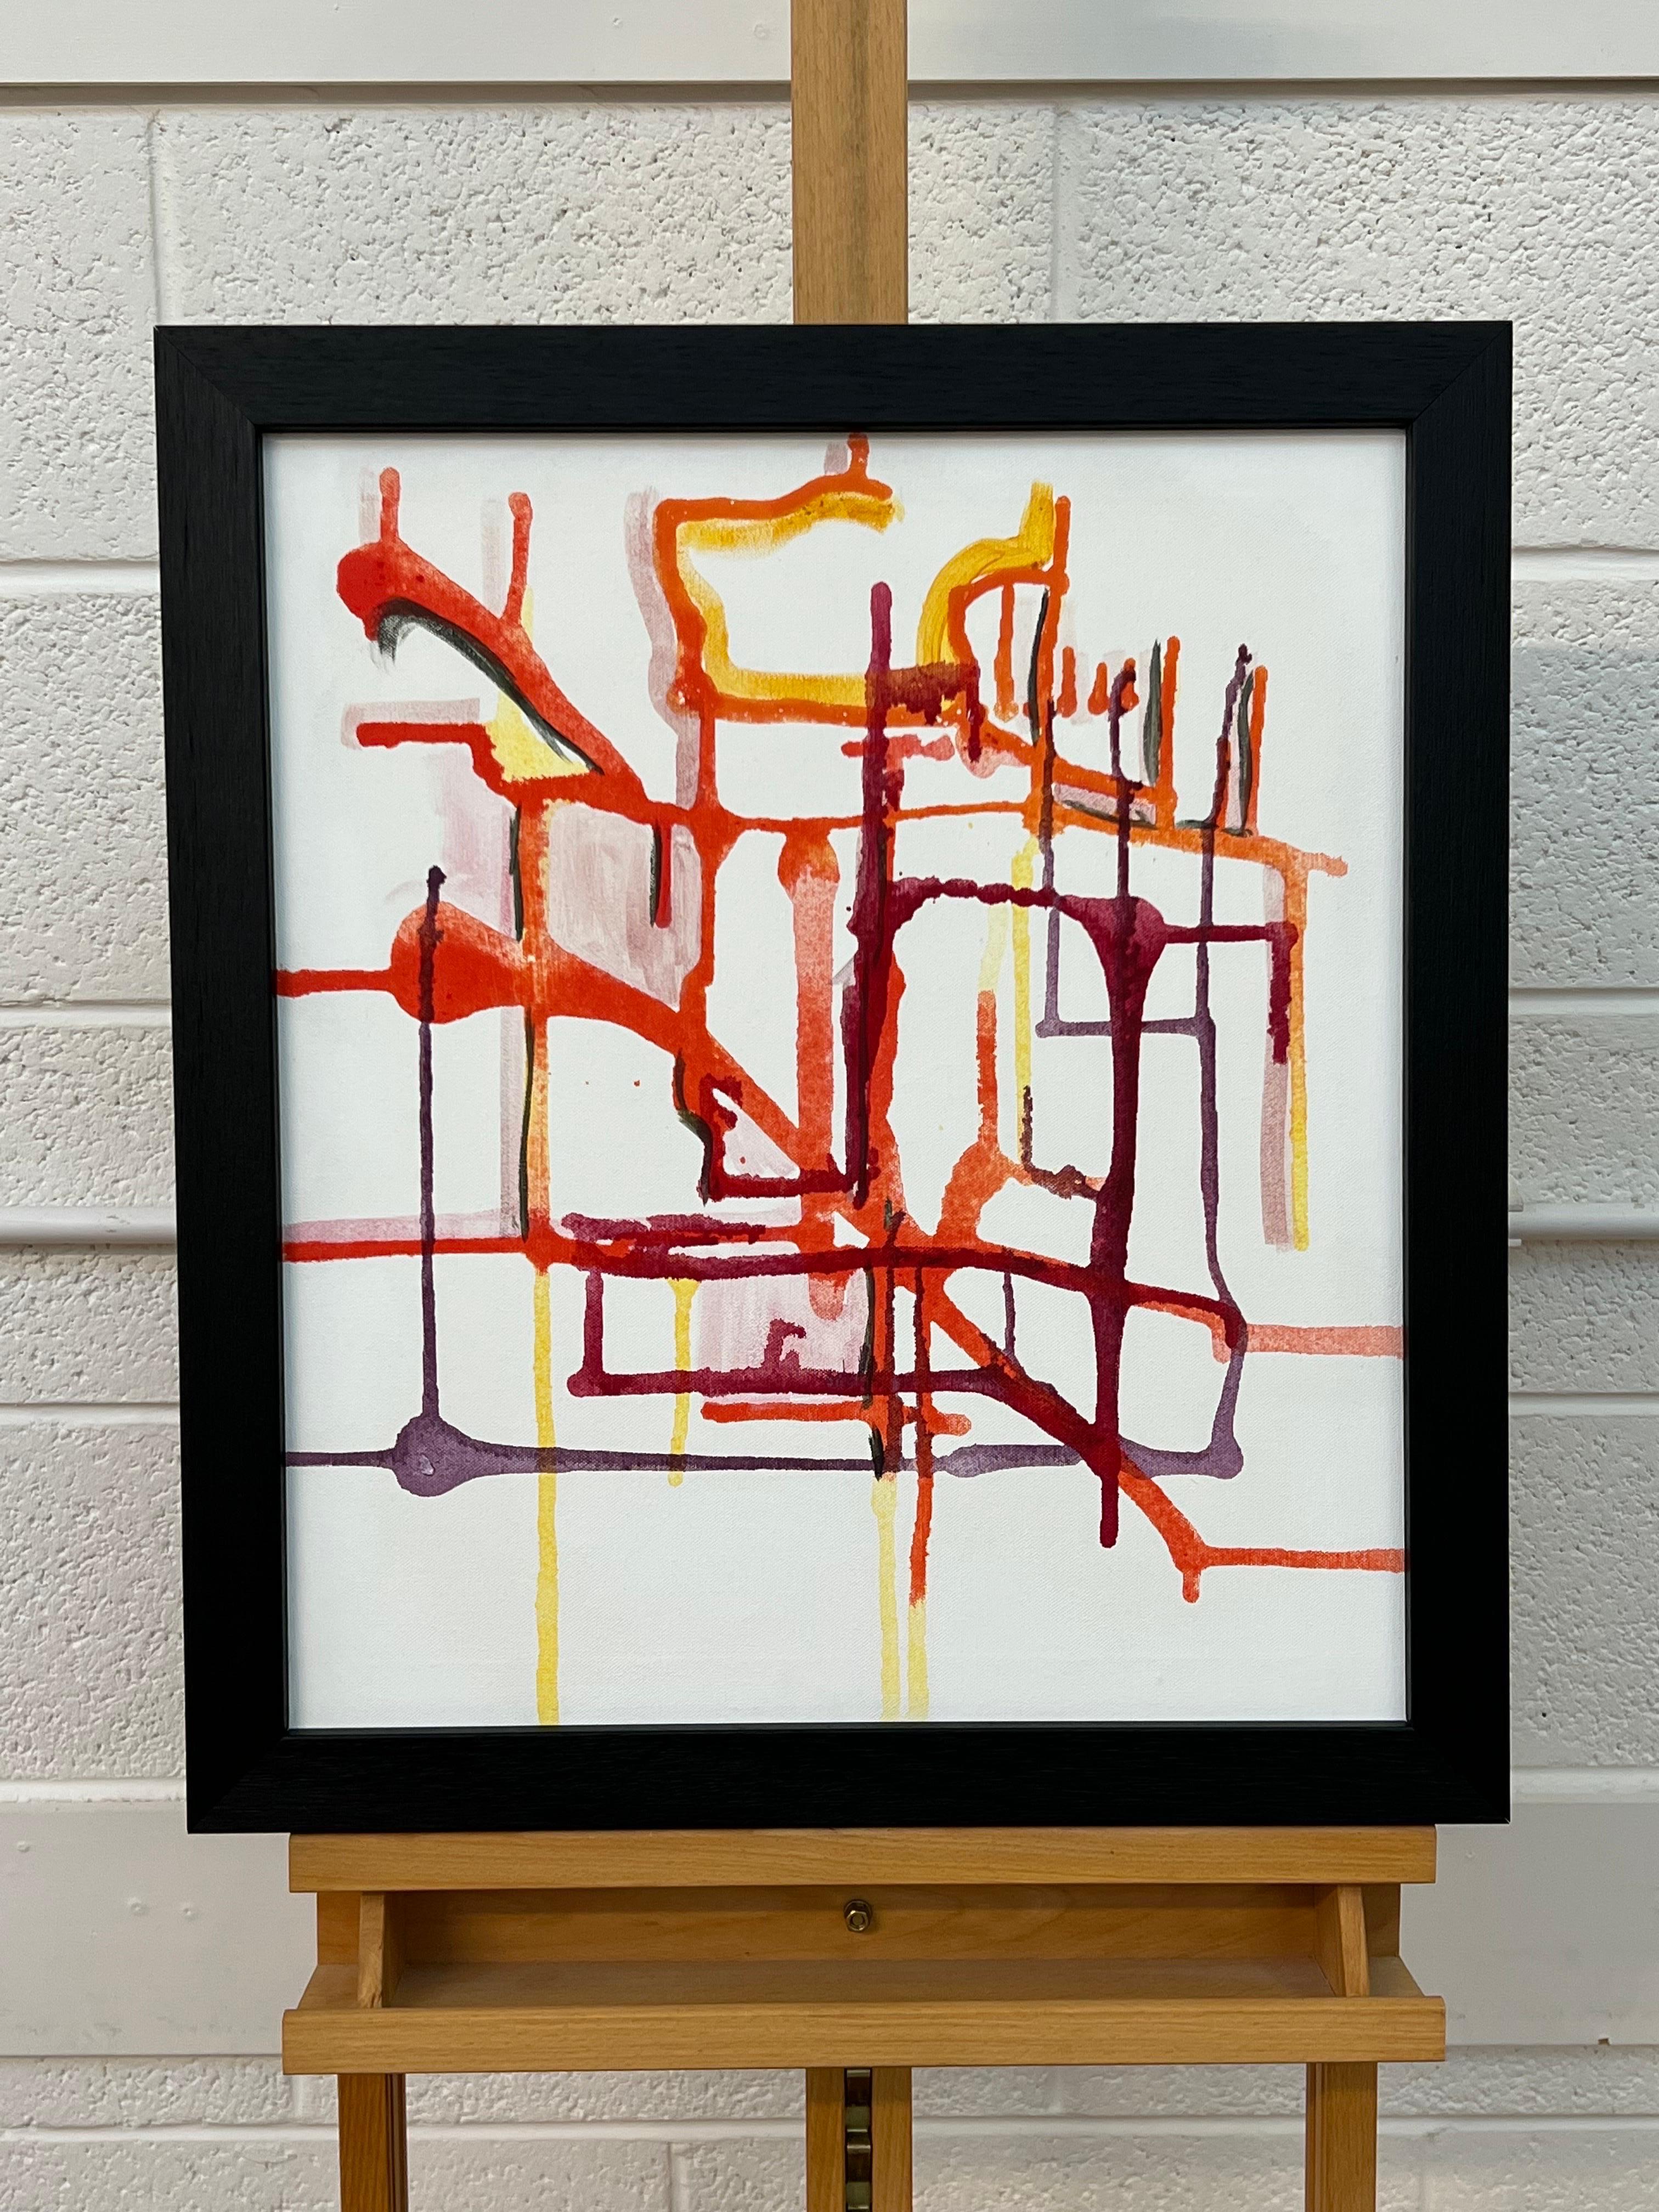 Early Abstract Art Purple Orange & Yellow on White Background by British Artist For Sale 1